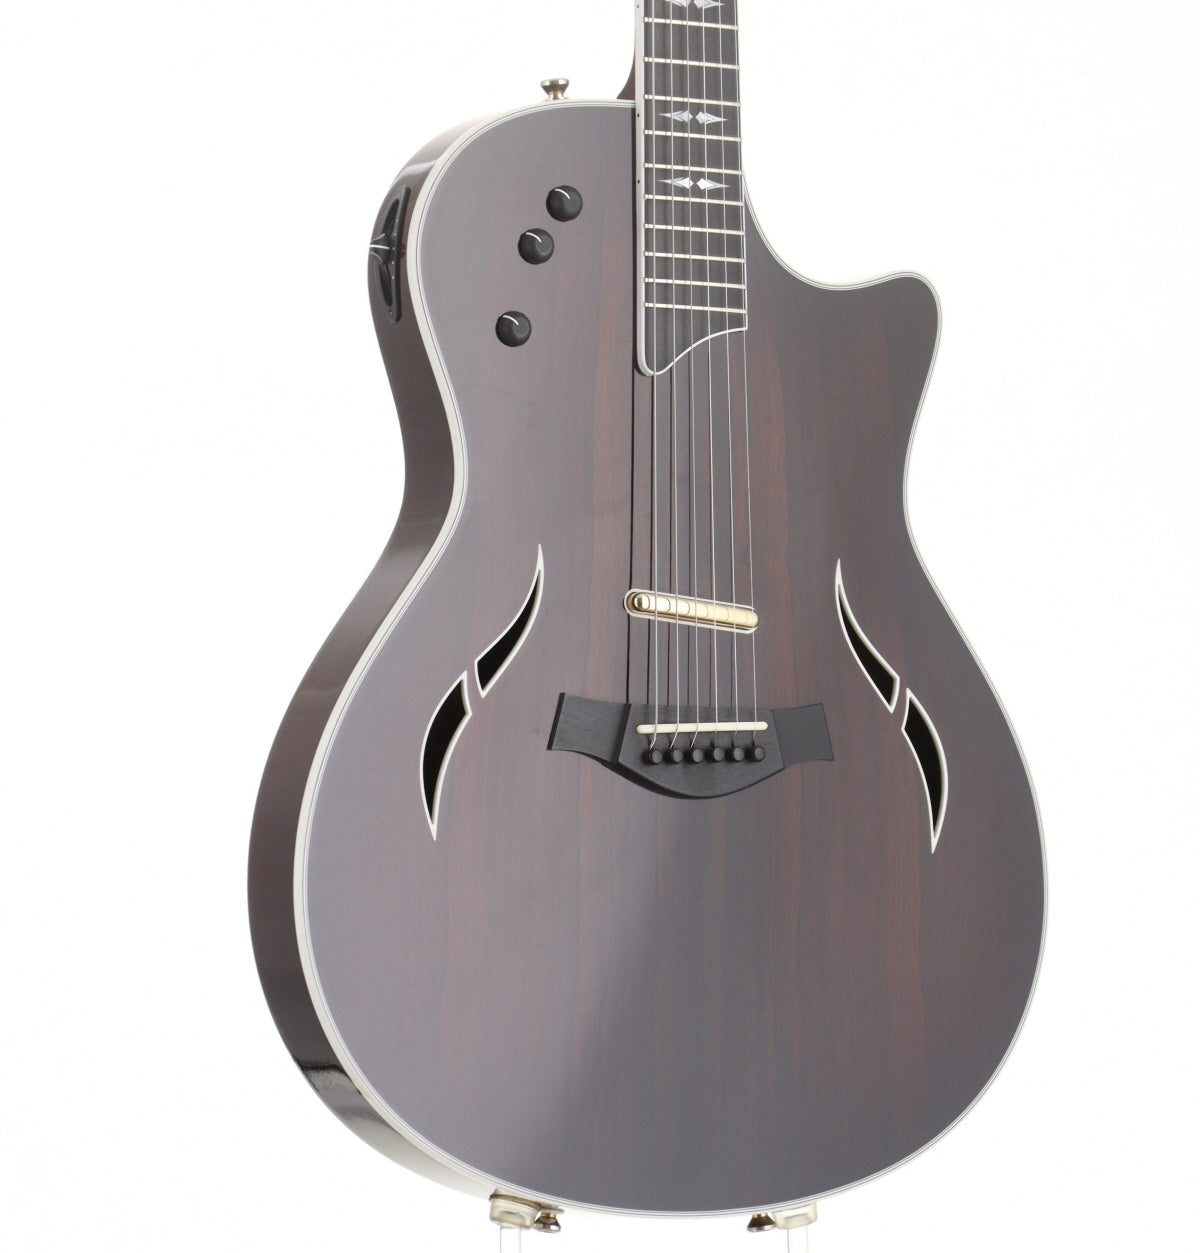 [SN 1101129142] USED Taylor / T5-C3 Cocobolo Top 2013 [06]